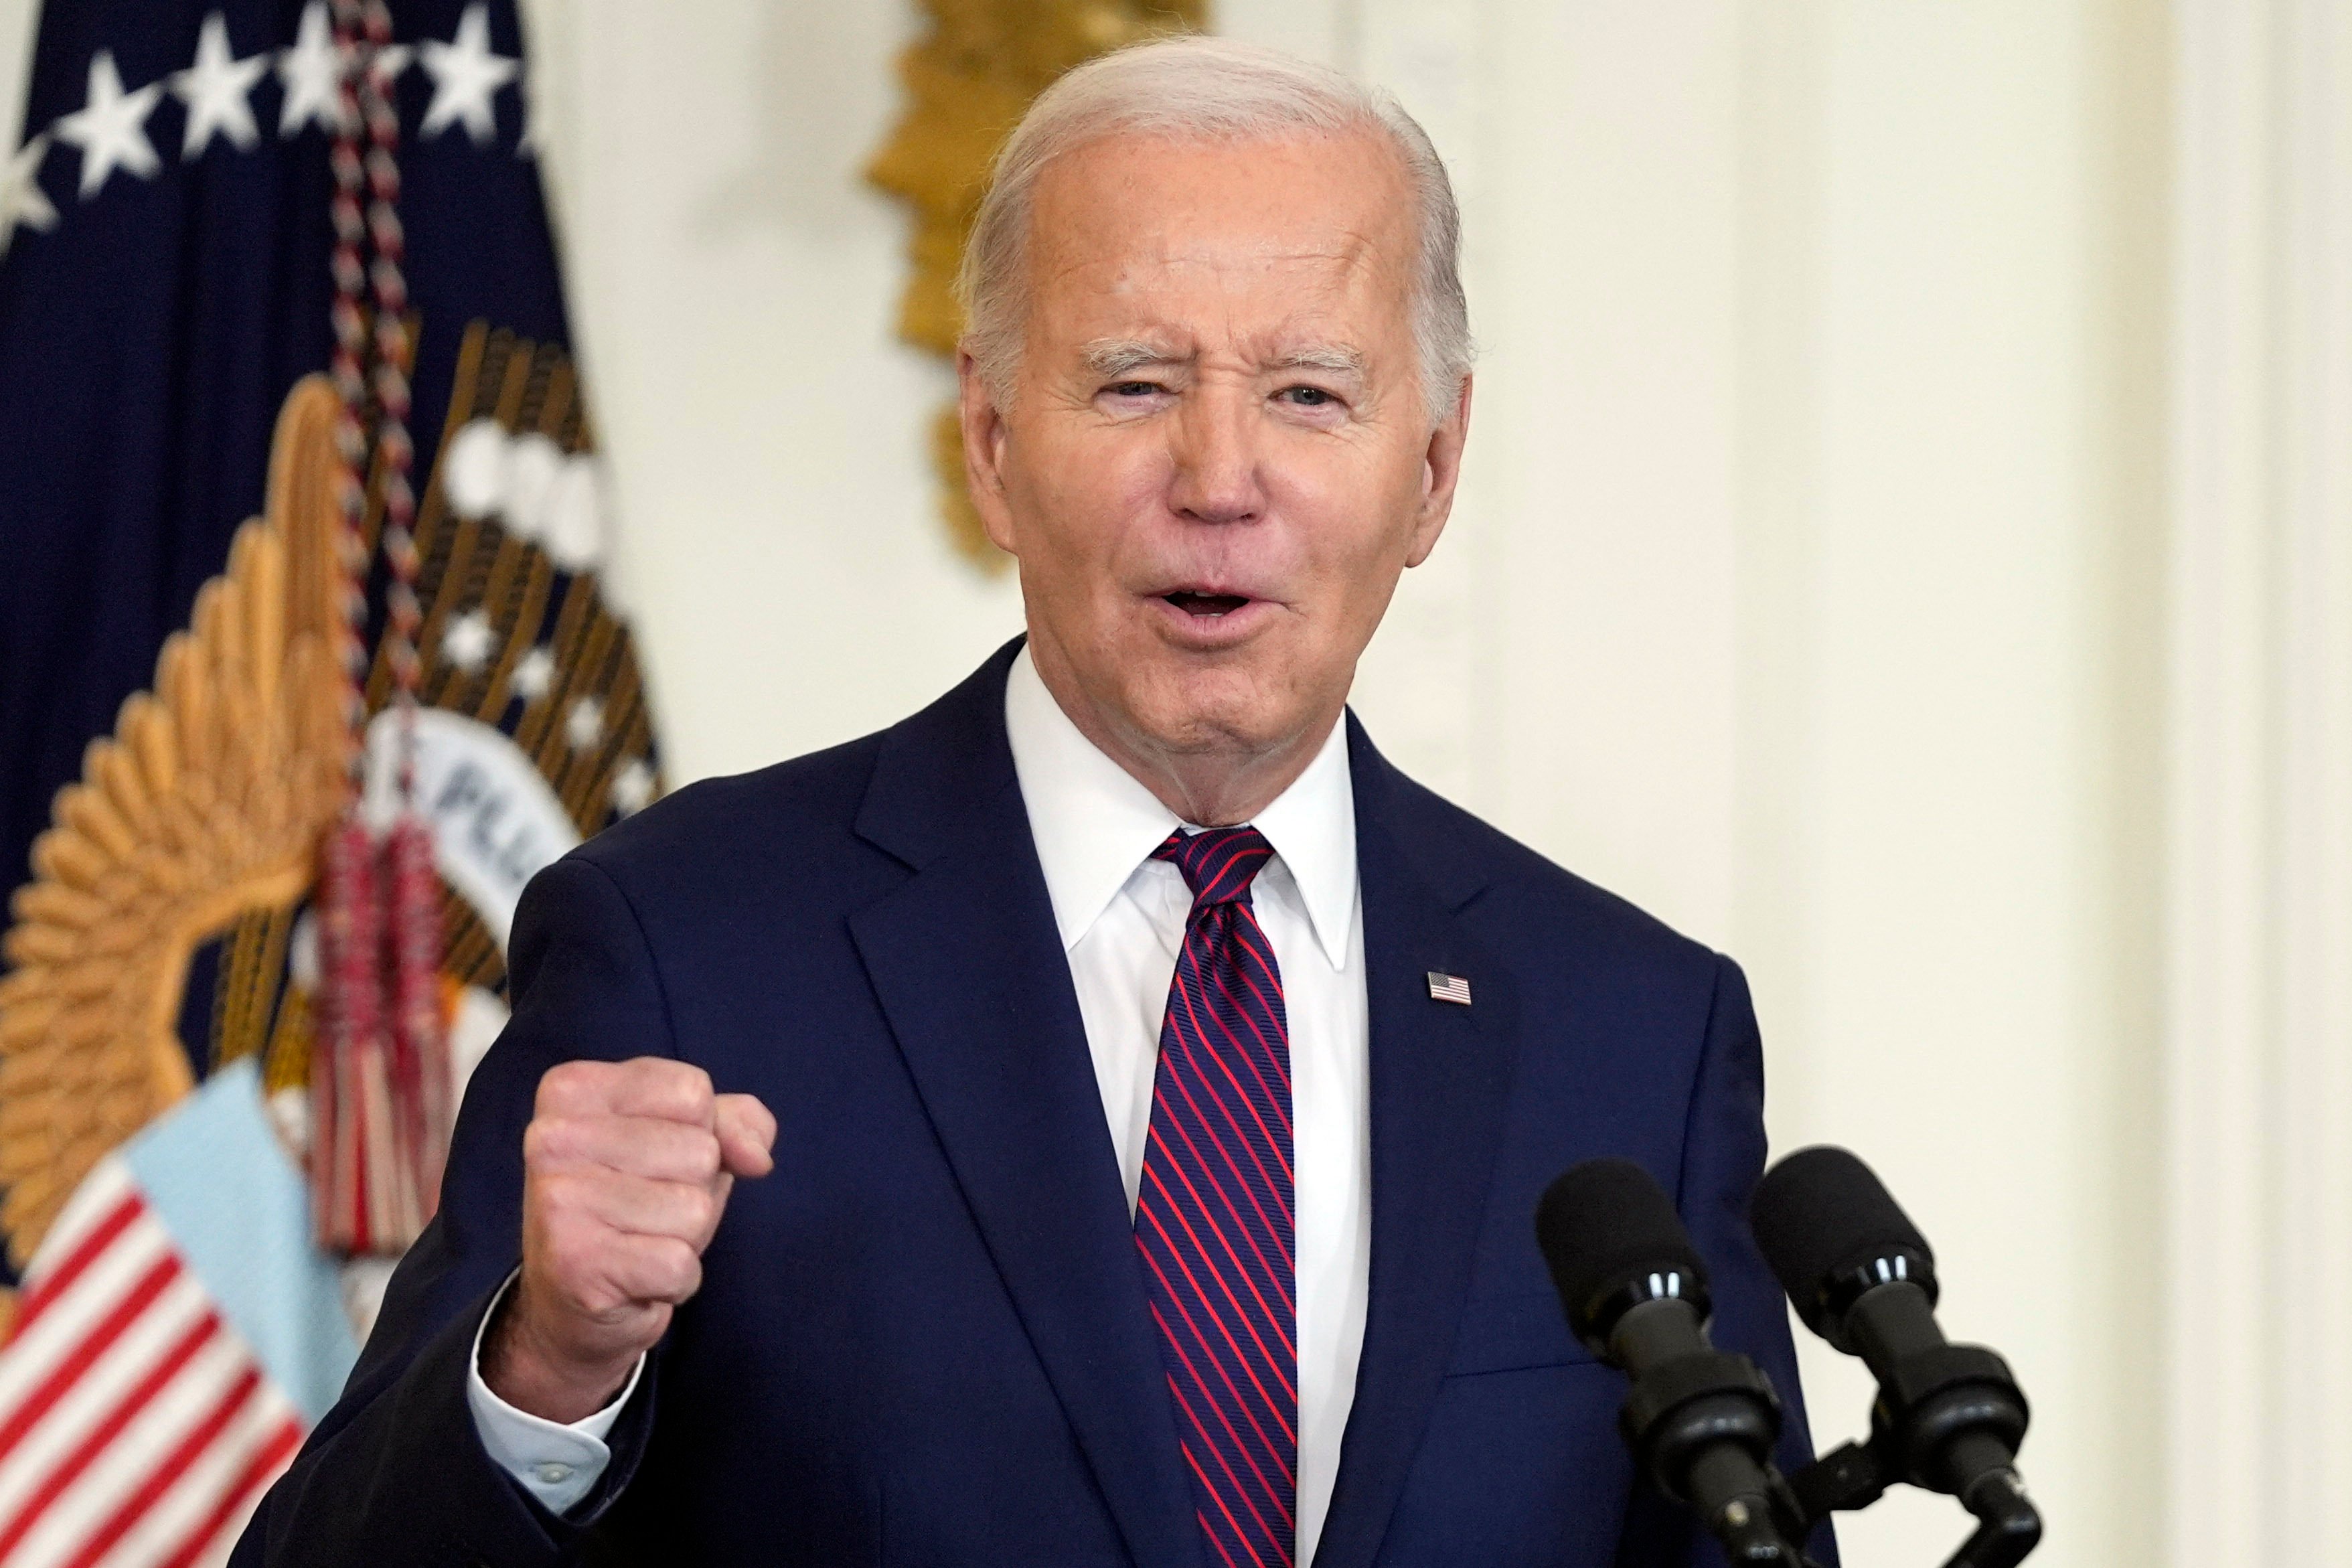 US President Joe Biden speaking in Washington on January 19. The New Hampshire attorney general’s office is investigating reports of an apparent robocall that mimicked Biden’s voice to discourage voting in the primary election on January 23. Photo: AP